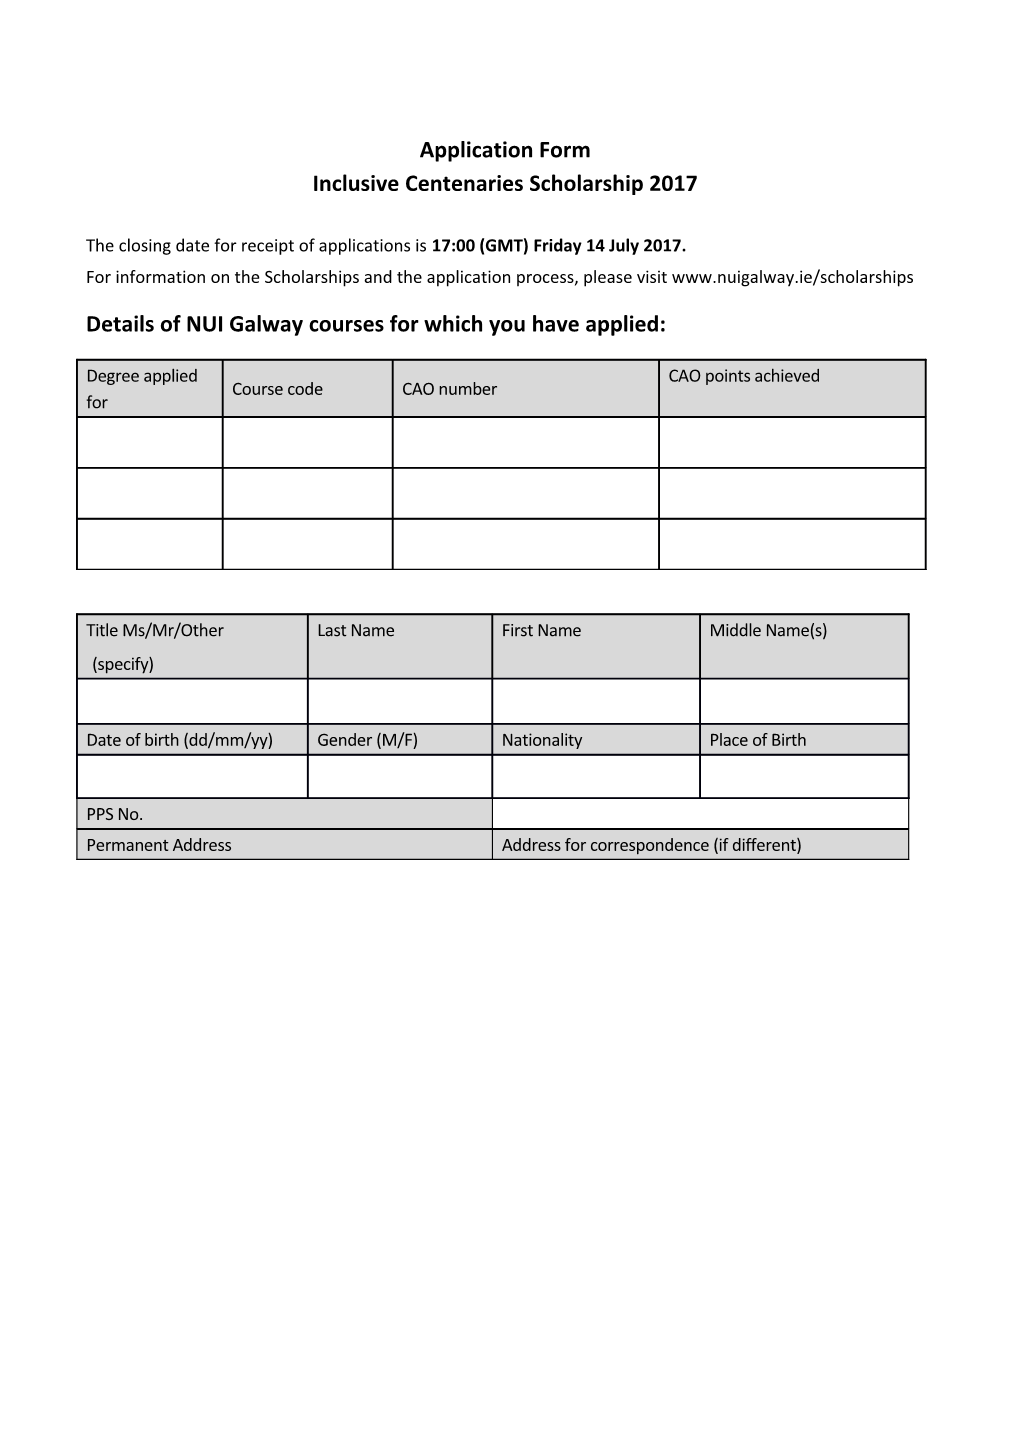 Application Form s35